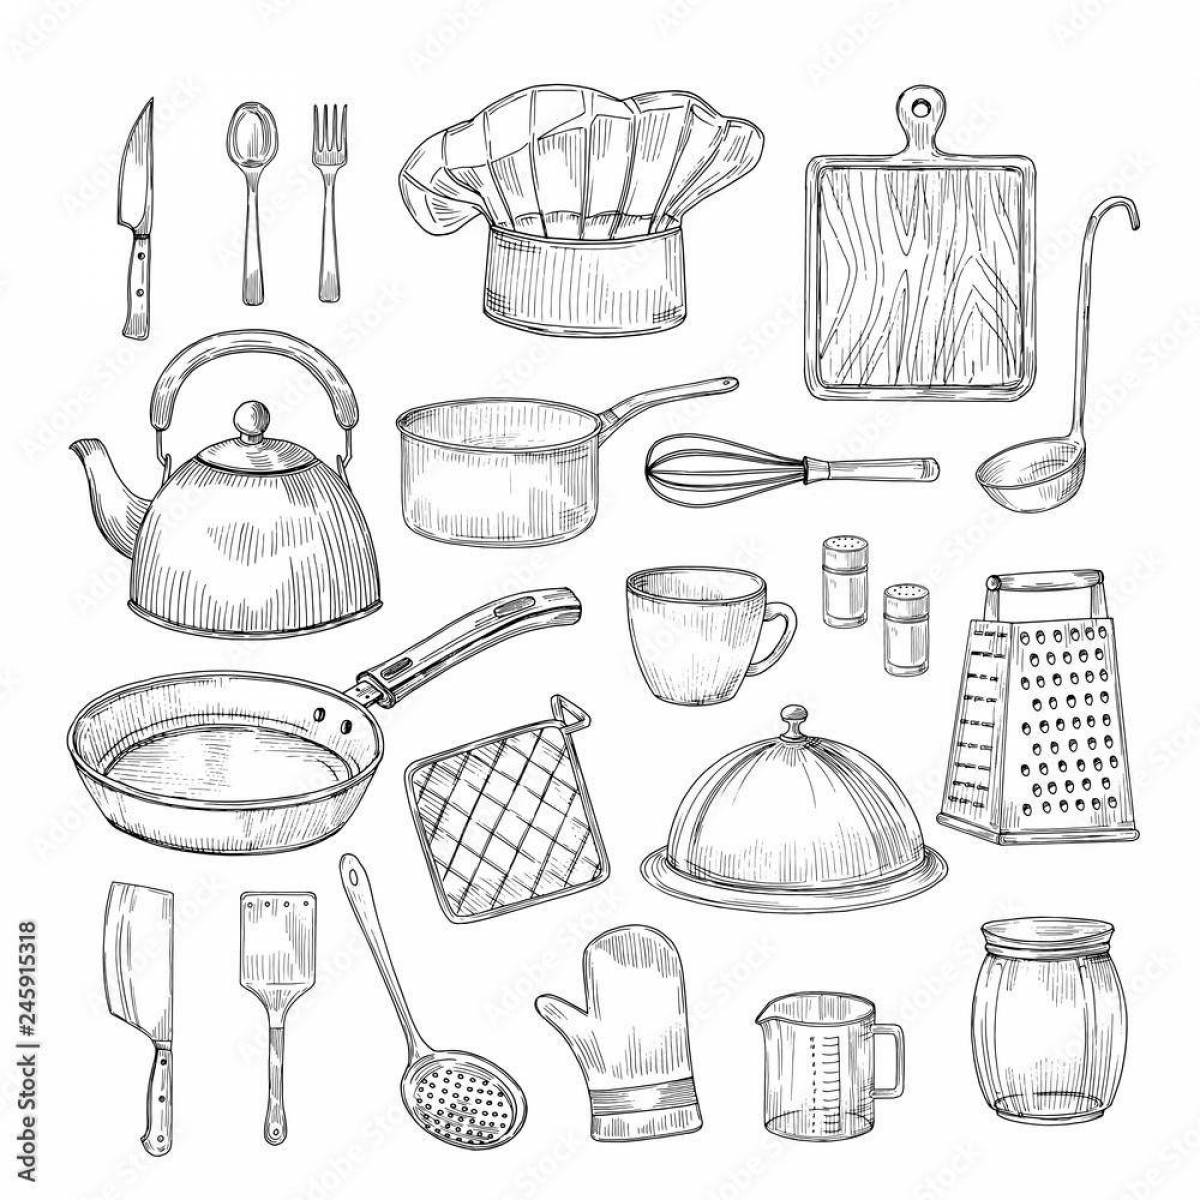 Awesome cook tools coloring book